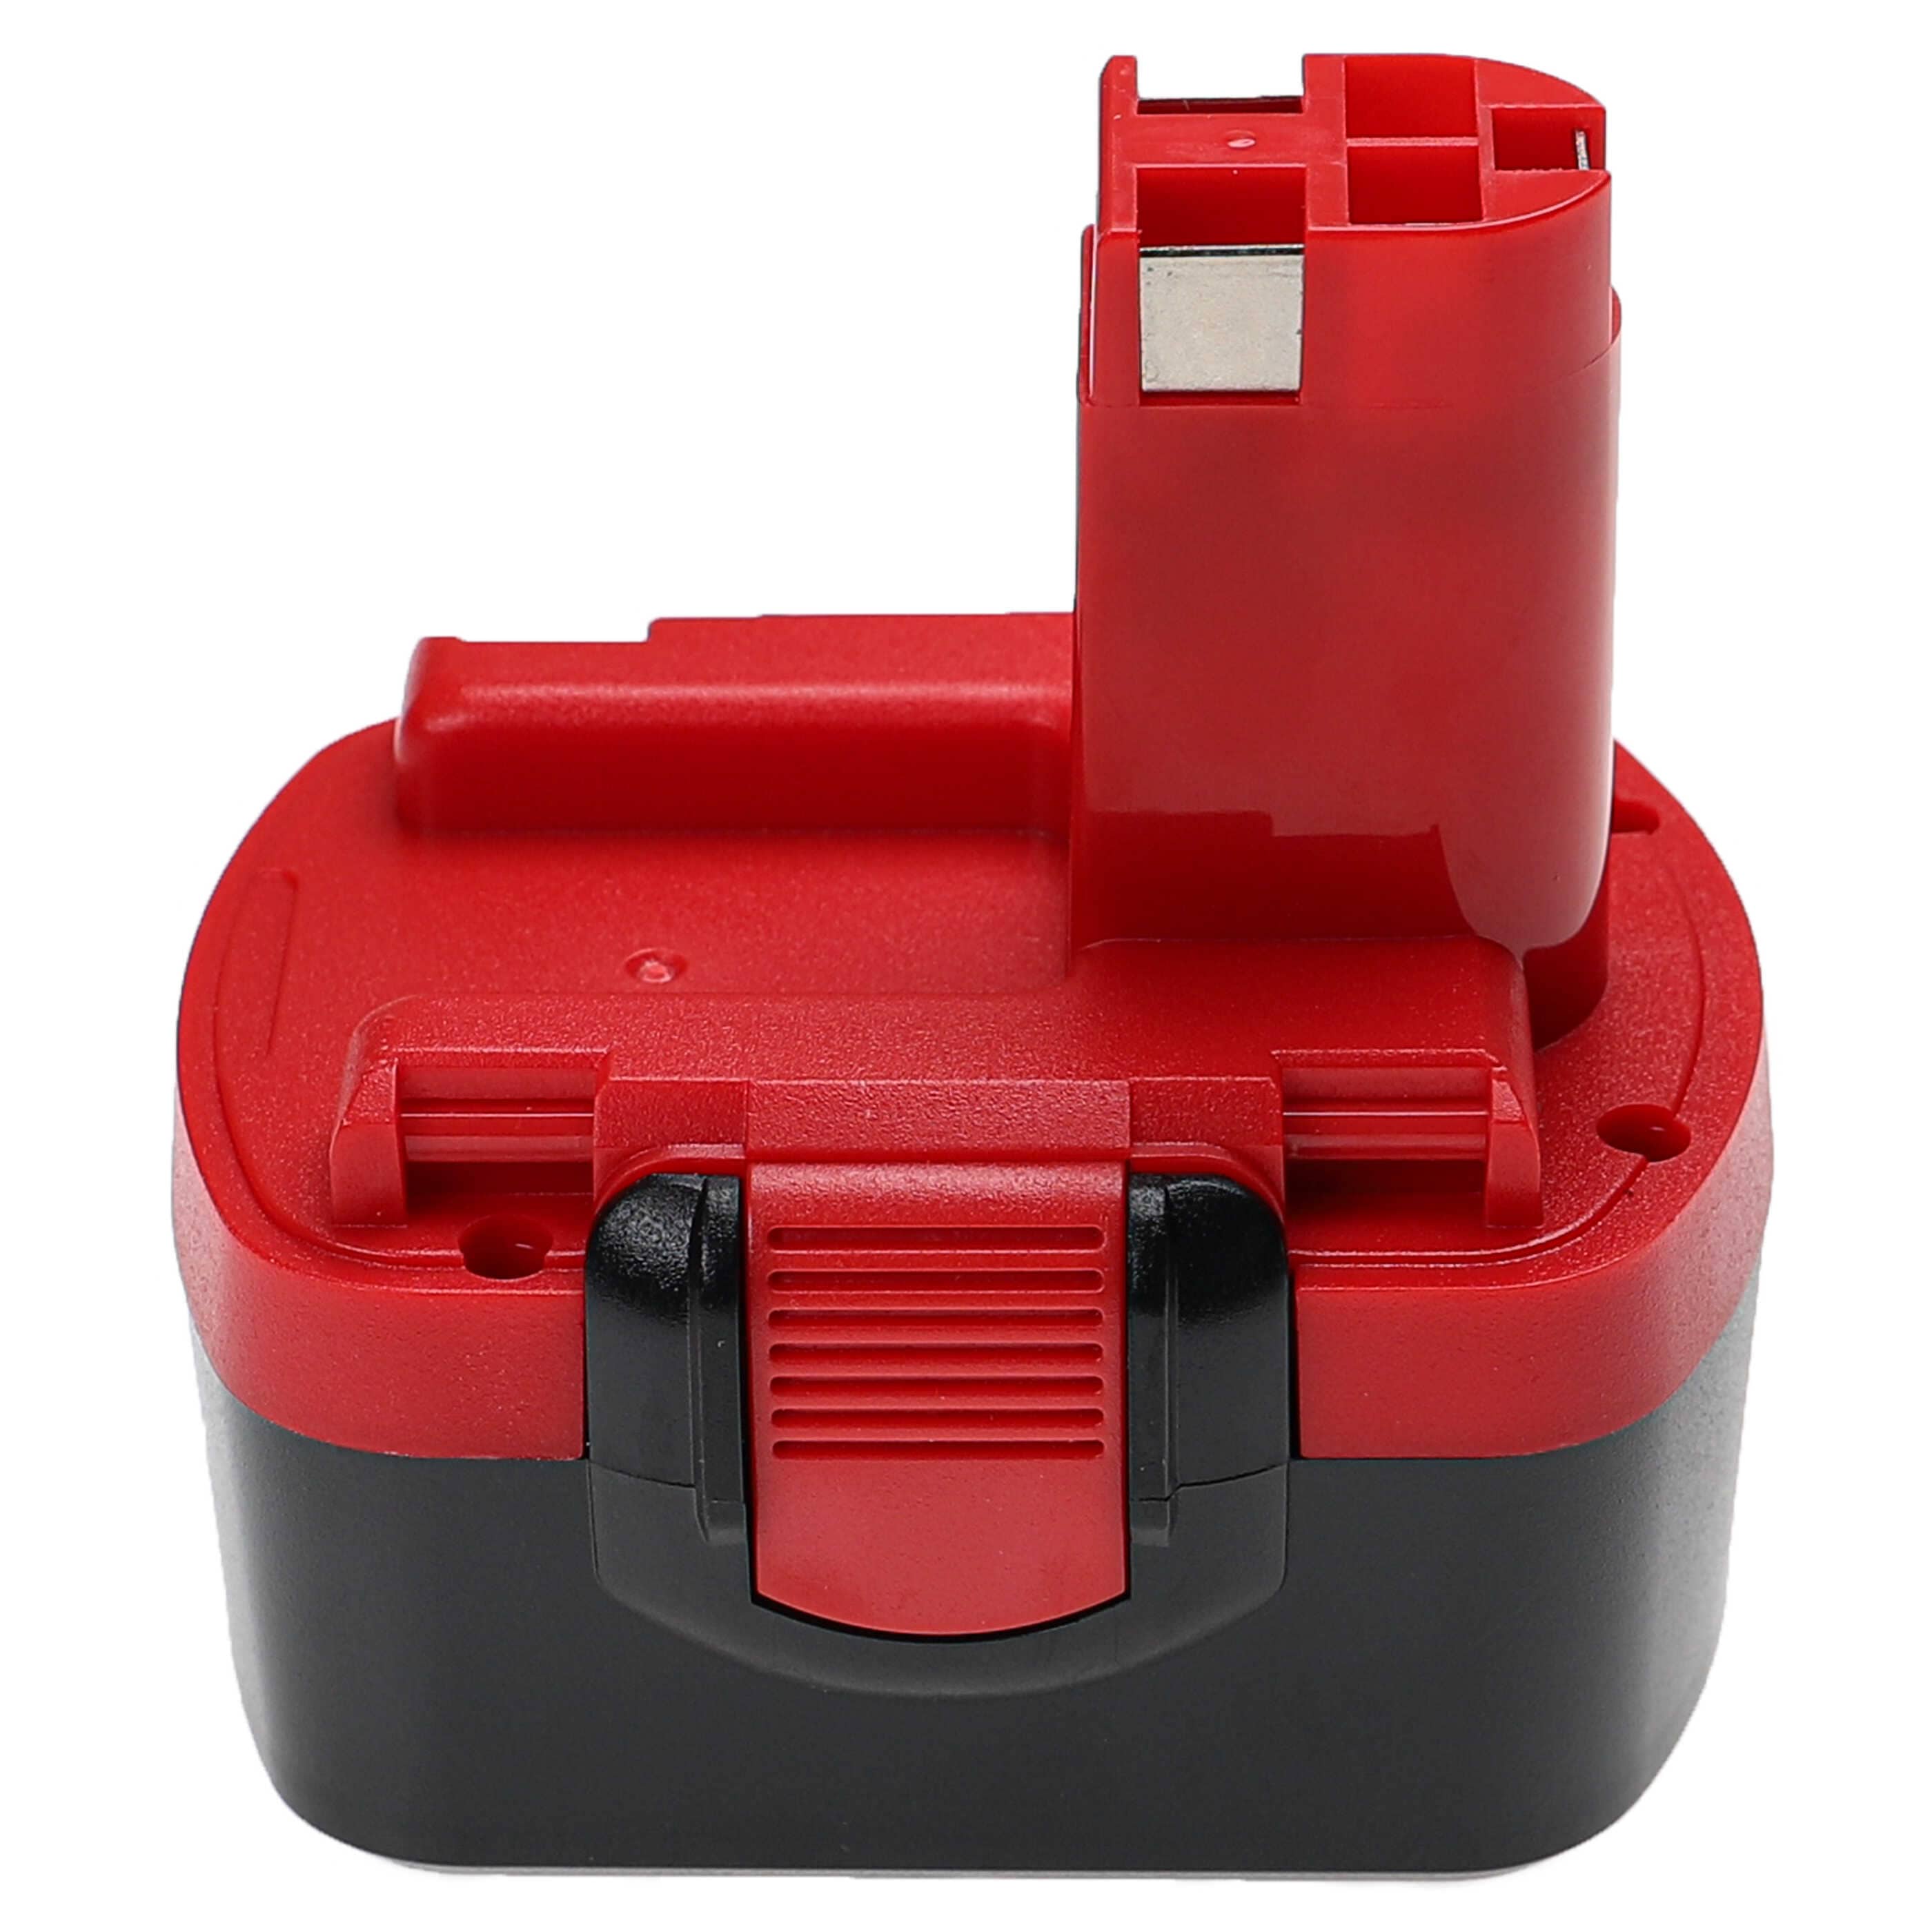 Electric Power Tool Battery (3x Unit) Replaces Bosch 2 607 335 263, 1617S0004W - 2500 mAh, 14.4 V, NiMH